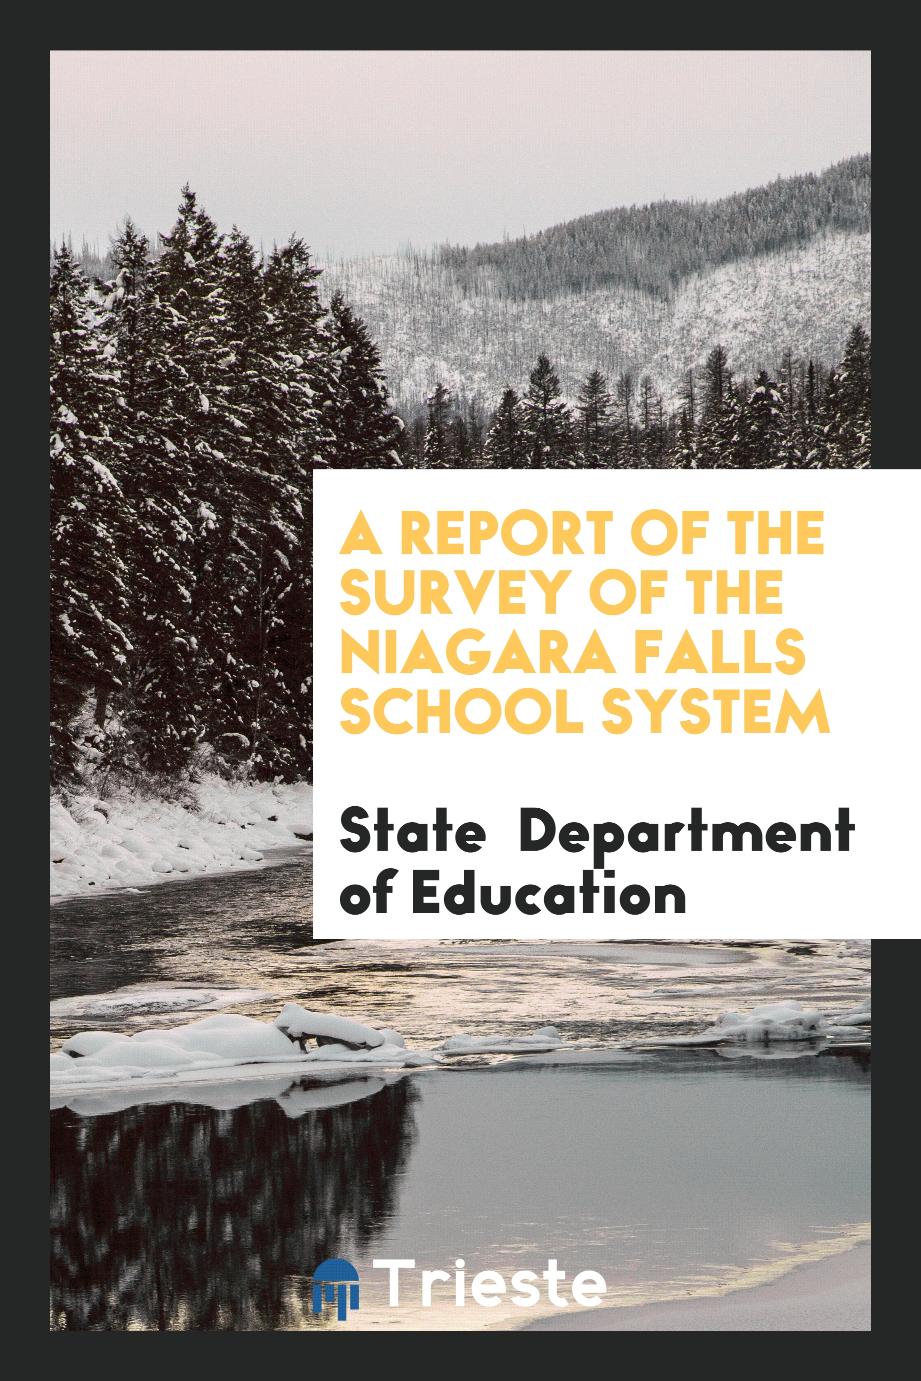 A Report of the Survey of the Niagara Falls School System